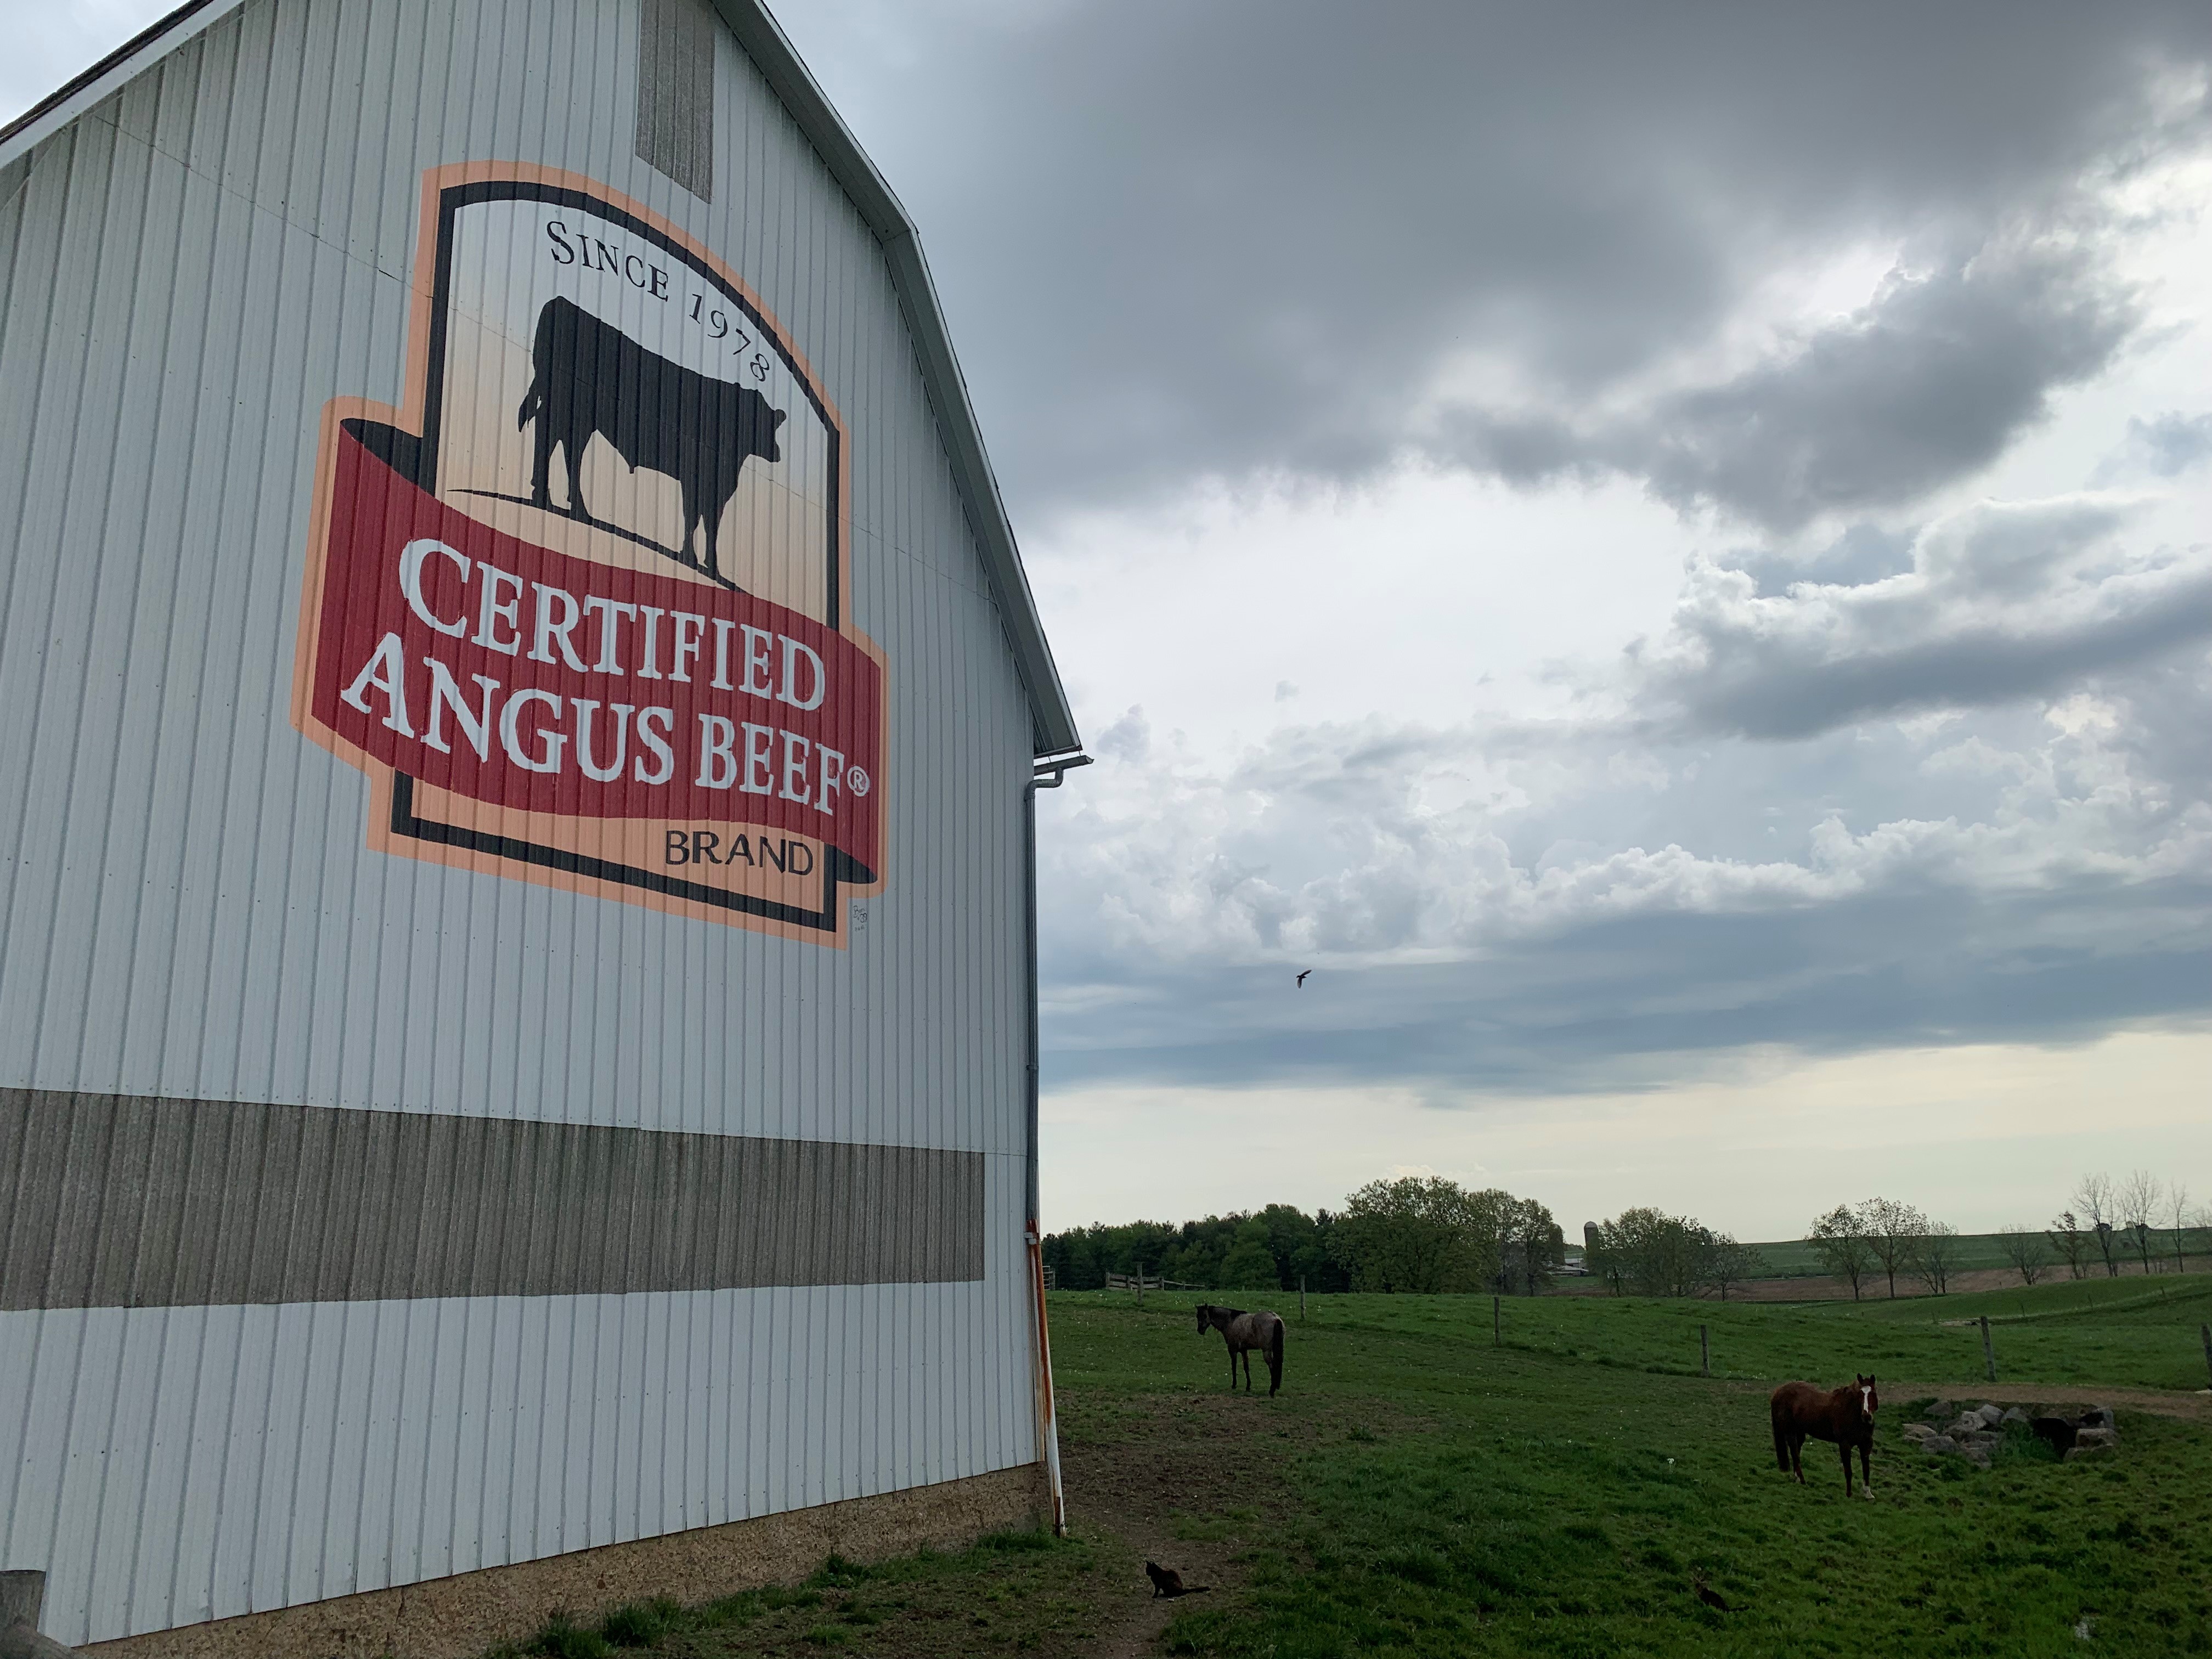 Certified Angus Beef brand logo at Chippewa Valley Angus Farms